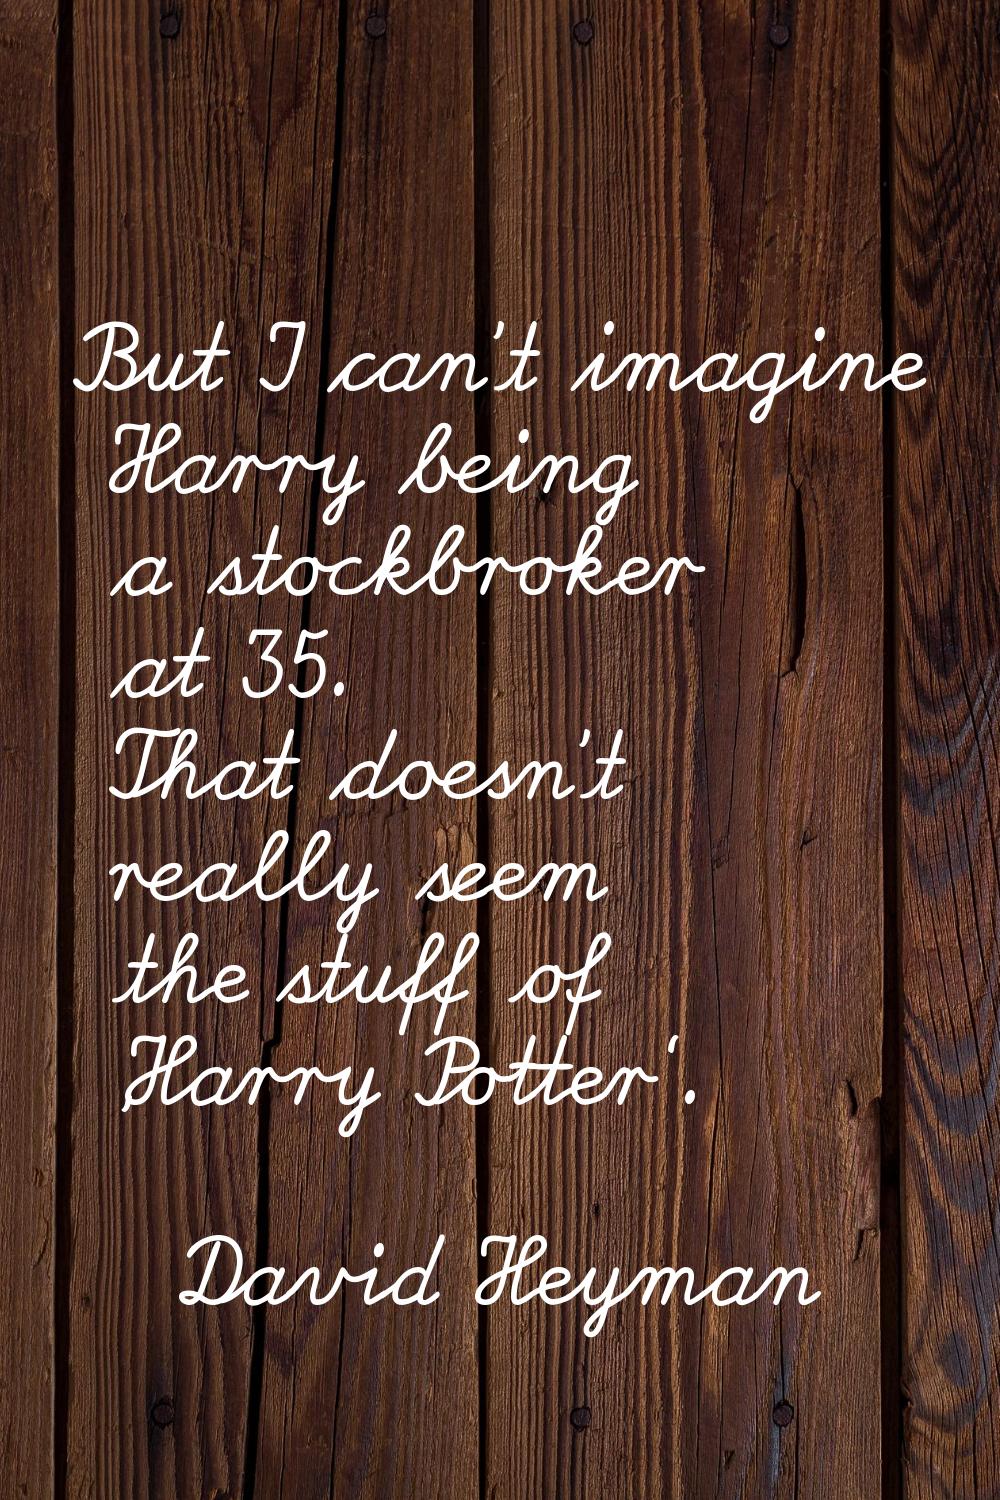 But I can't imagine Harry being a stockbroker at 35. That doesn't really seem the stuff of 'Harry P